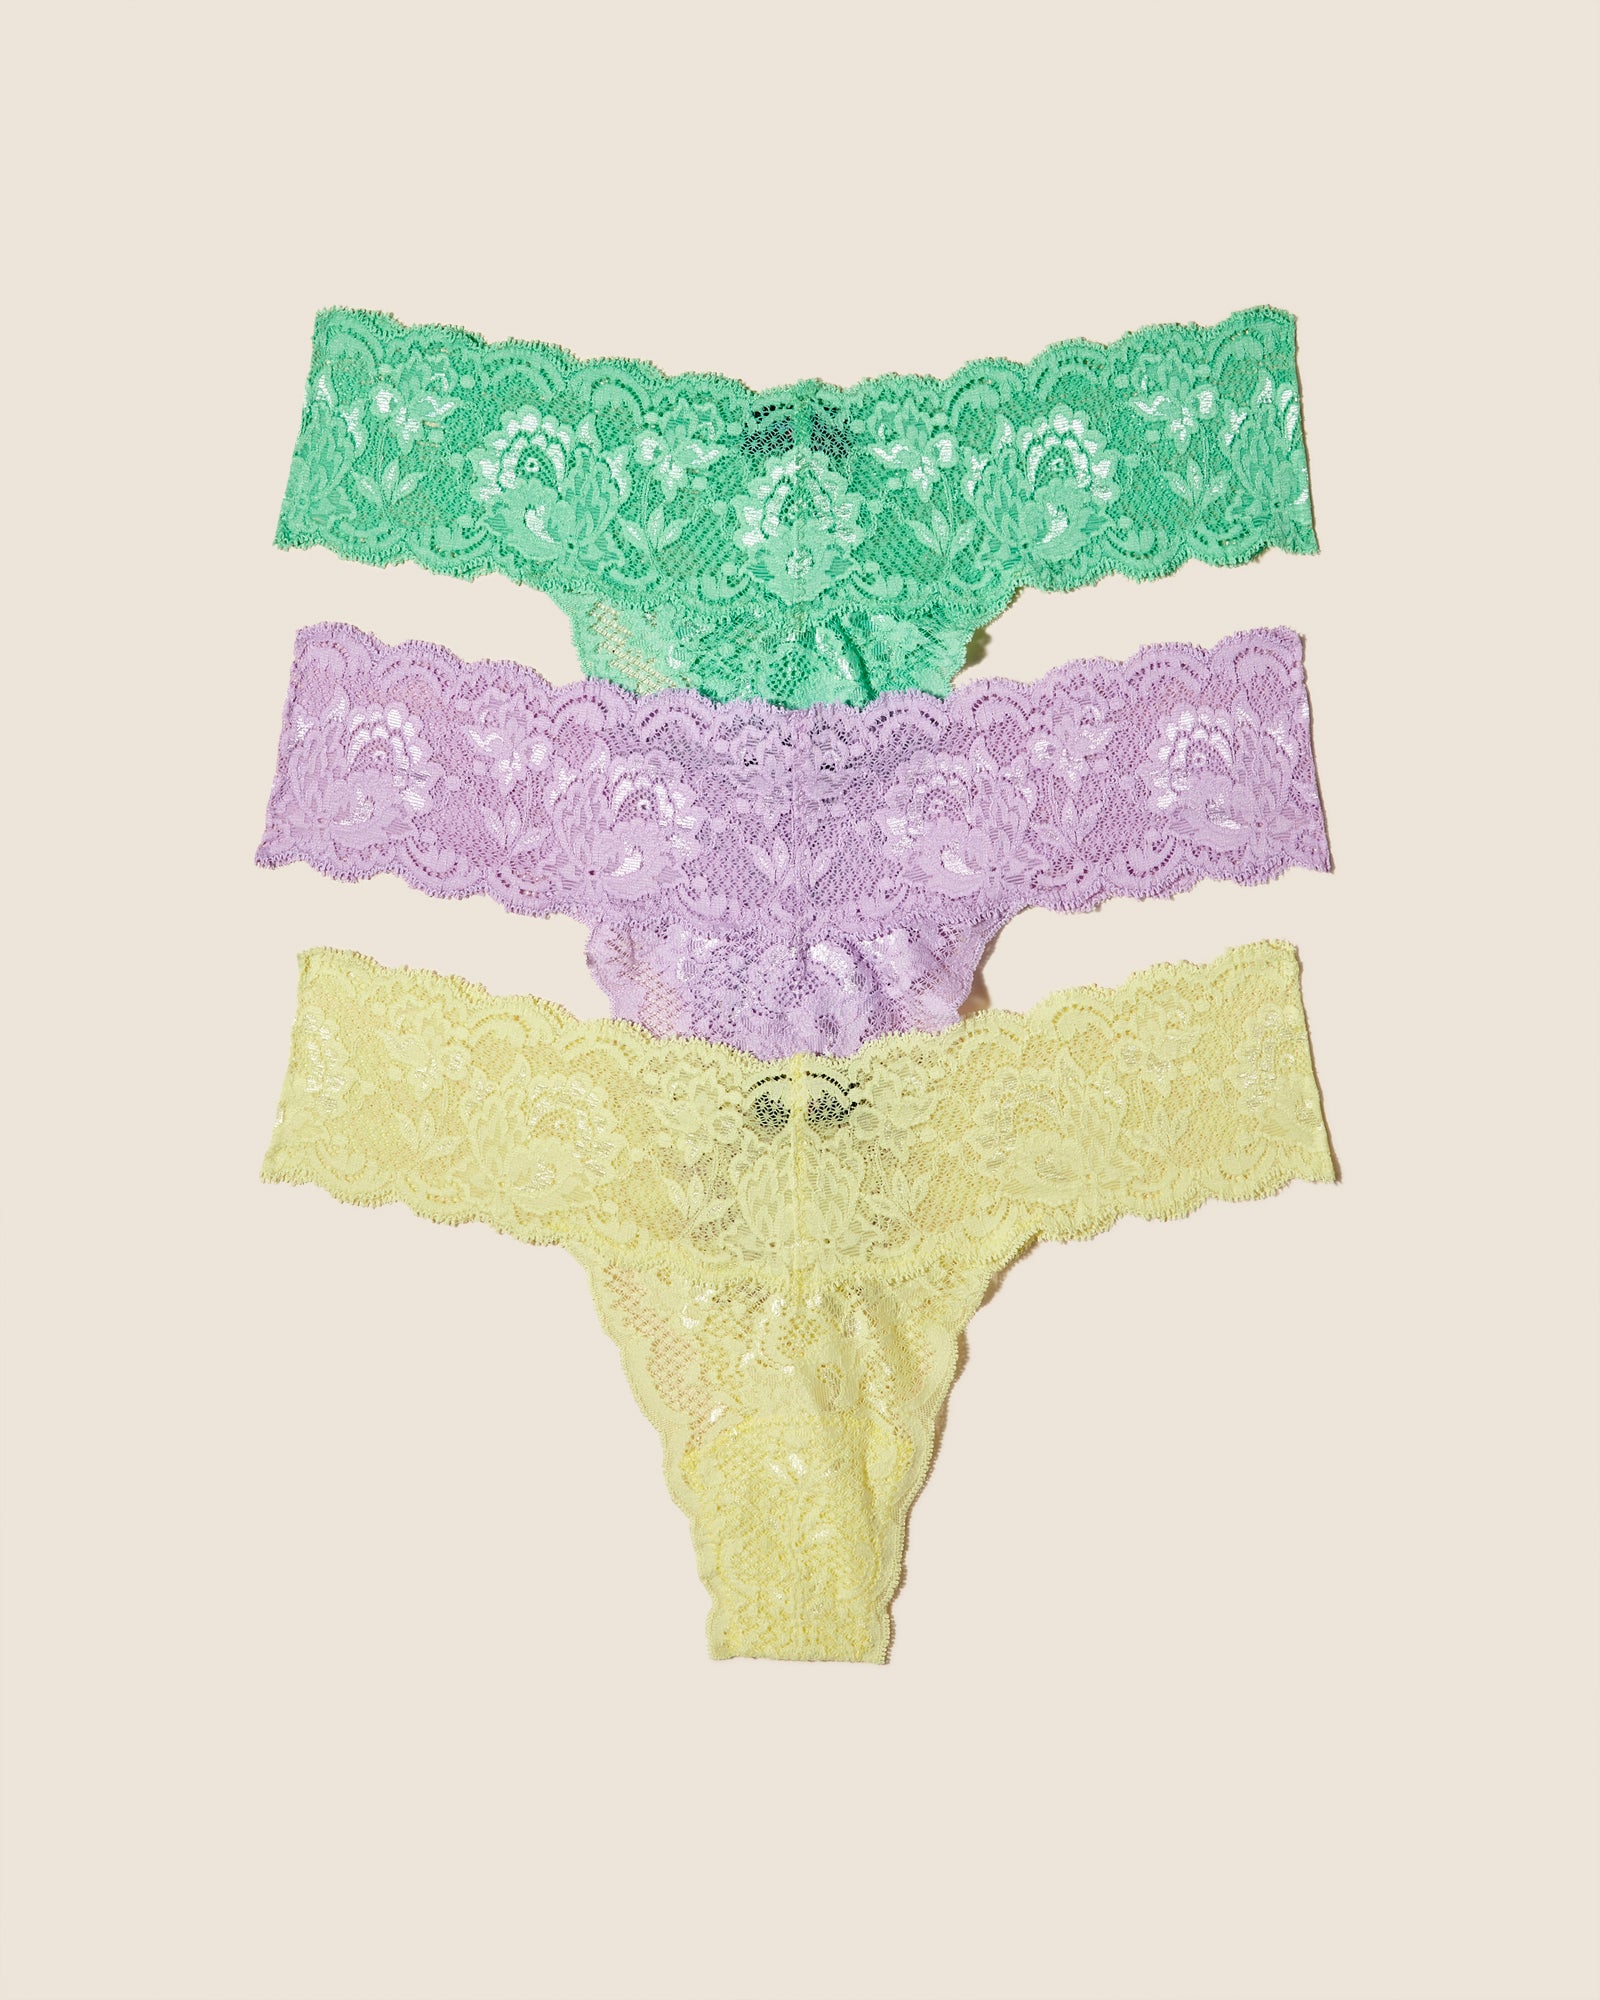 Cosabella  Never Say Never Emergency Panty 3 Pack